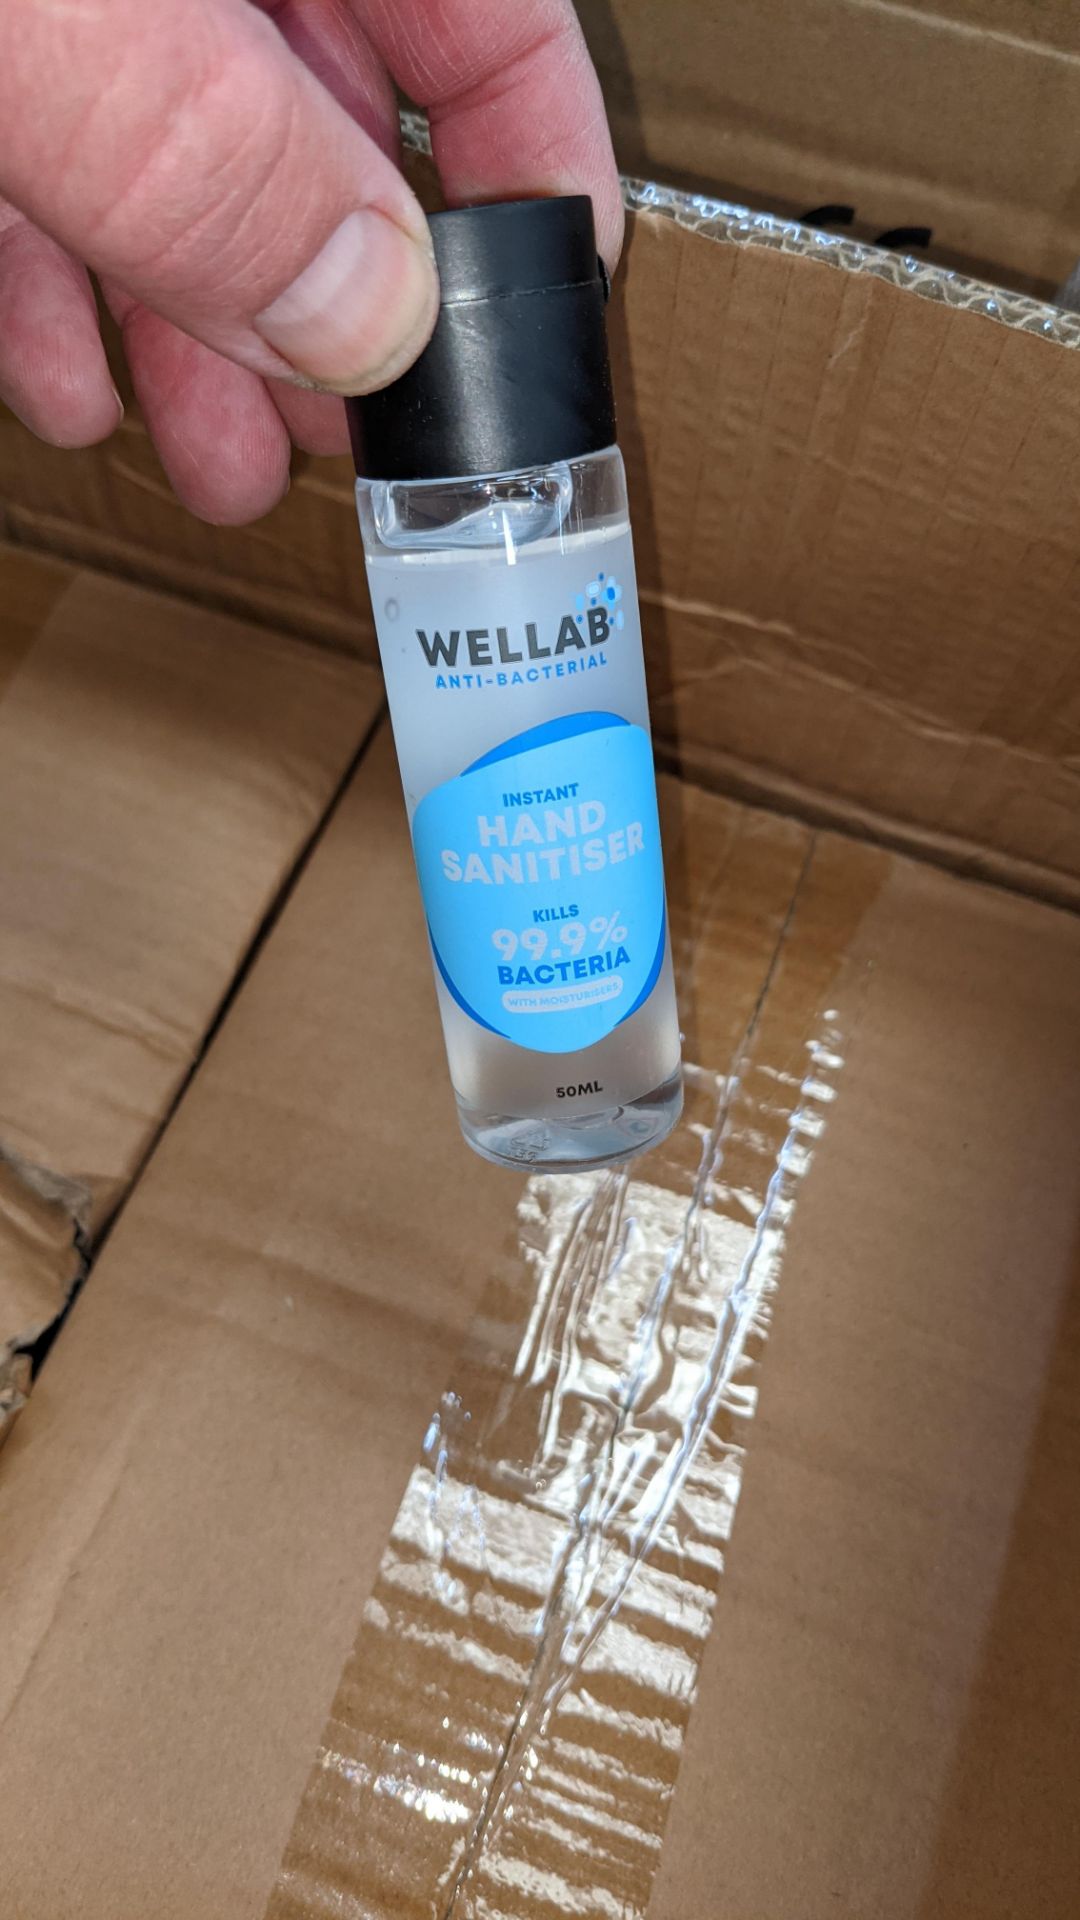 576 off travel sized bottles of Wellab antibacterial waterless hand sanitiser. Alcohol based, includ - Image 6 of 9